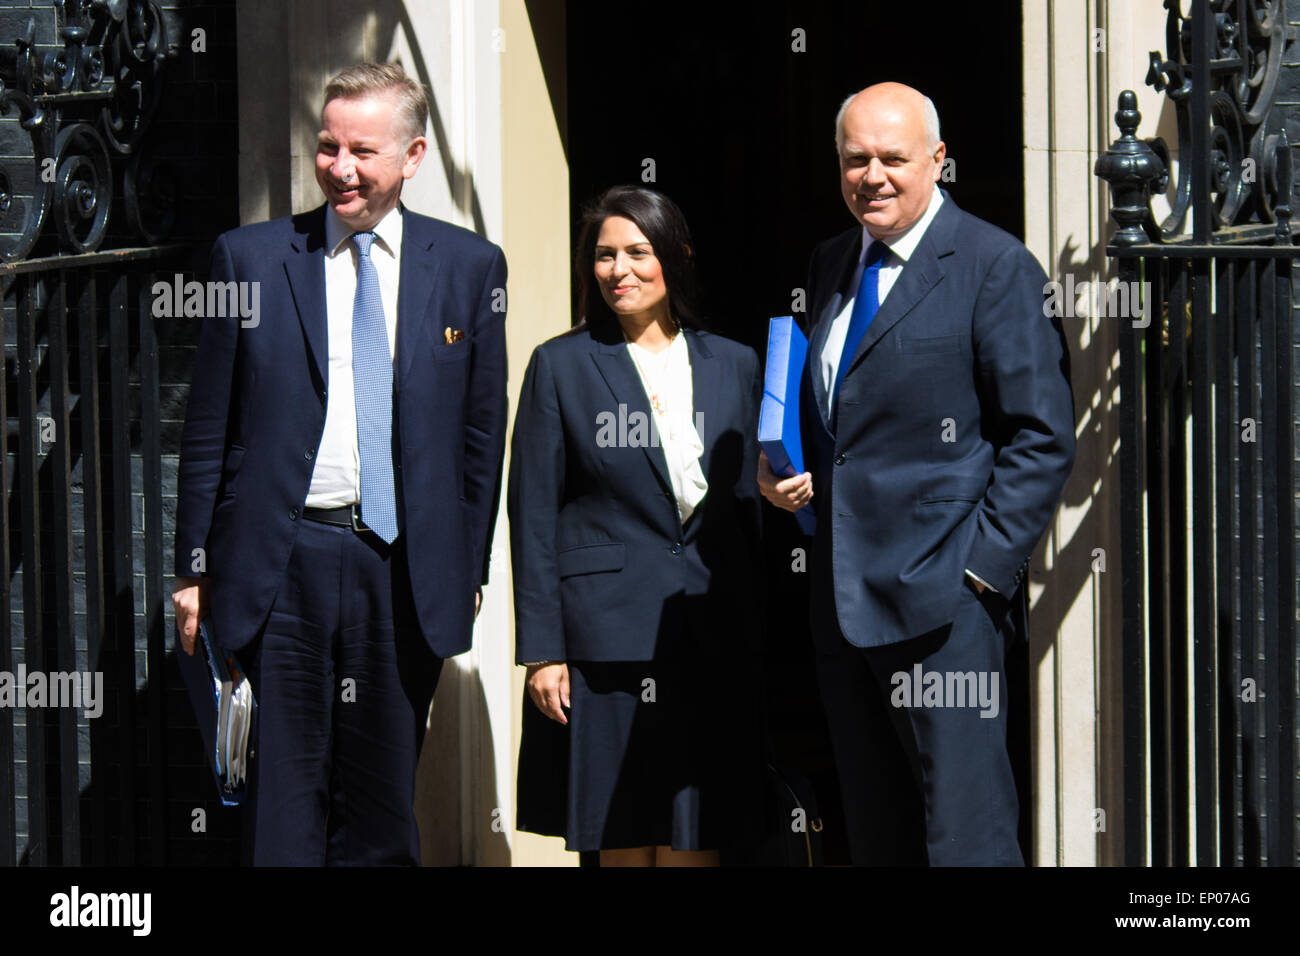 Downing Street, London, UK. 12th May, 2015. The all-conservatives Cabinet ministers gather for their first official meeting at Downing Street. PICTURED: Secretary of State for Justice Michael Gove, left, Minister of State for Employment Priti Patel and Secretary of State for Work and Pensions Iain Duncan-Smith. Credit:  Paul Davey/Alamy Live News Stock Photo